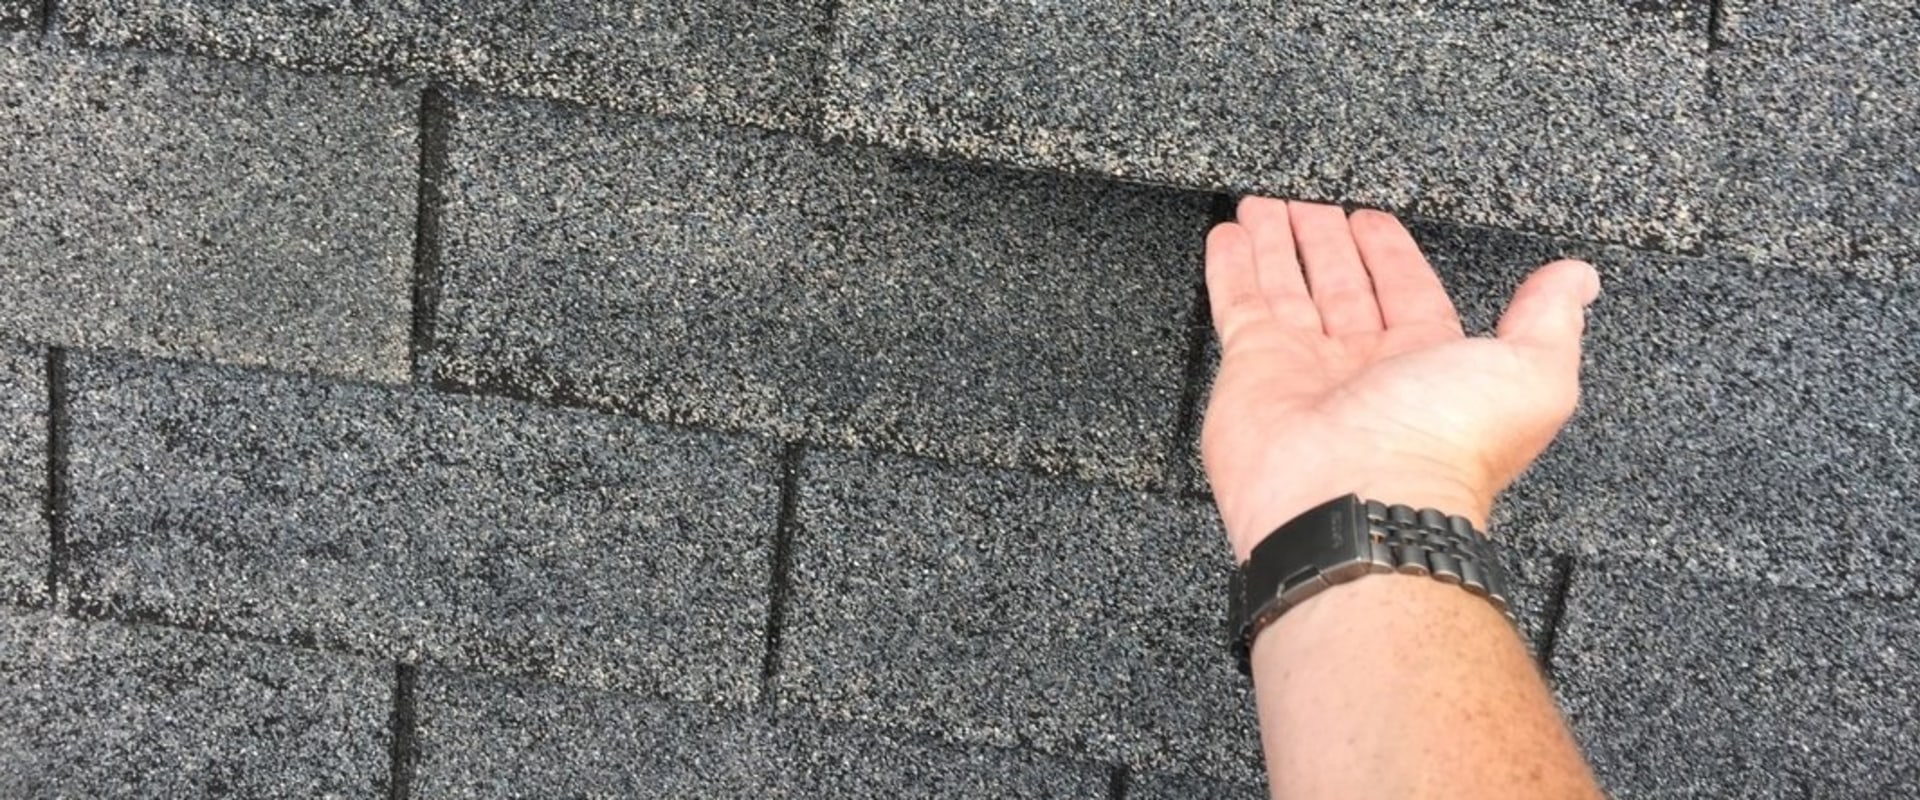 How do you know if roof needs to be replaced?